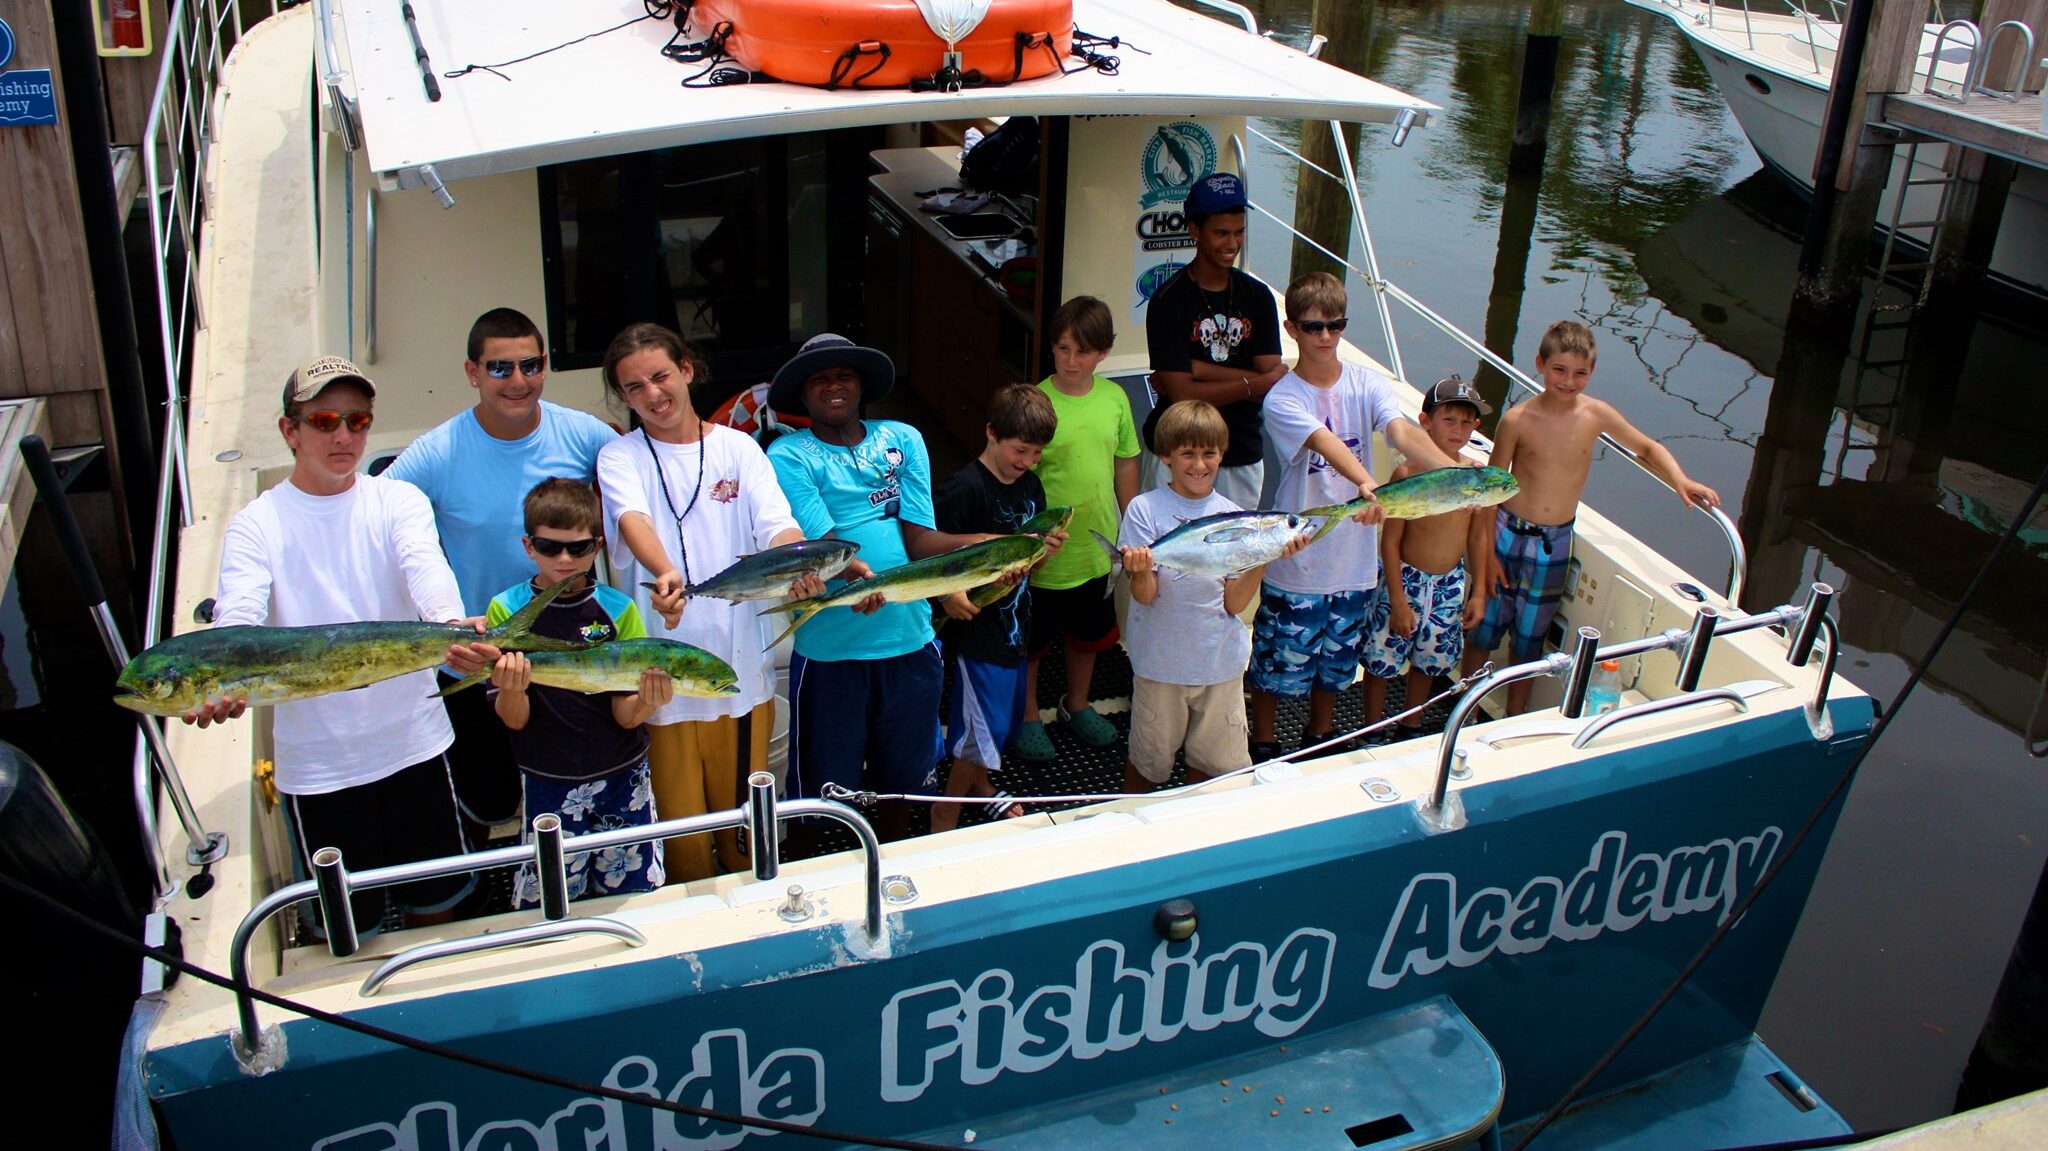 Youth with their fishing catches on the boat for nonprofit Florida Fishing Academy.